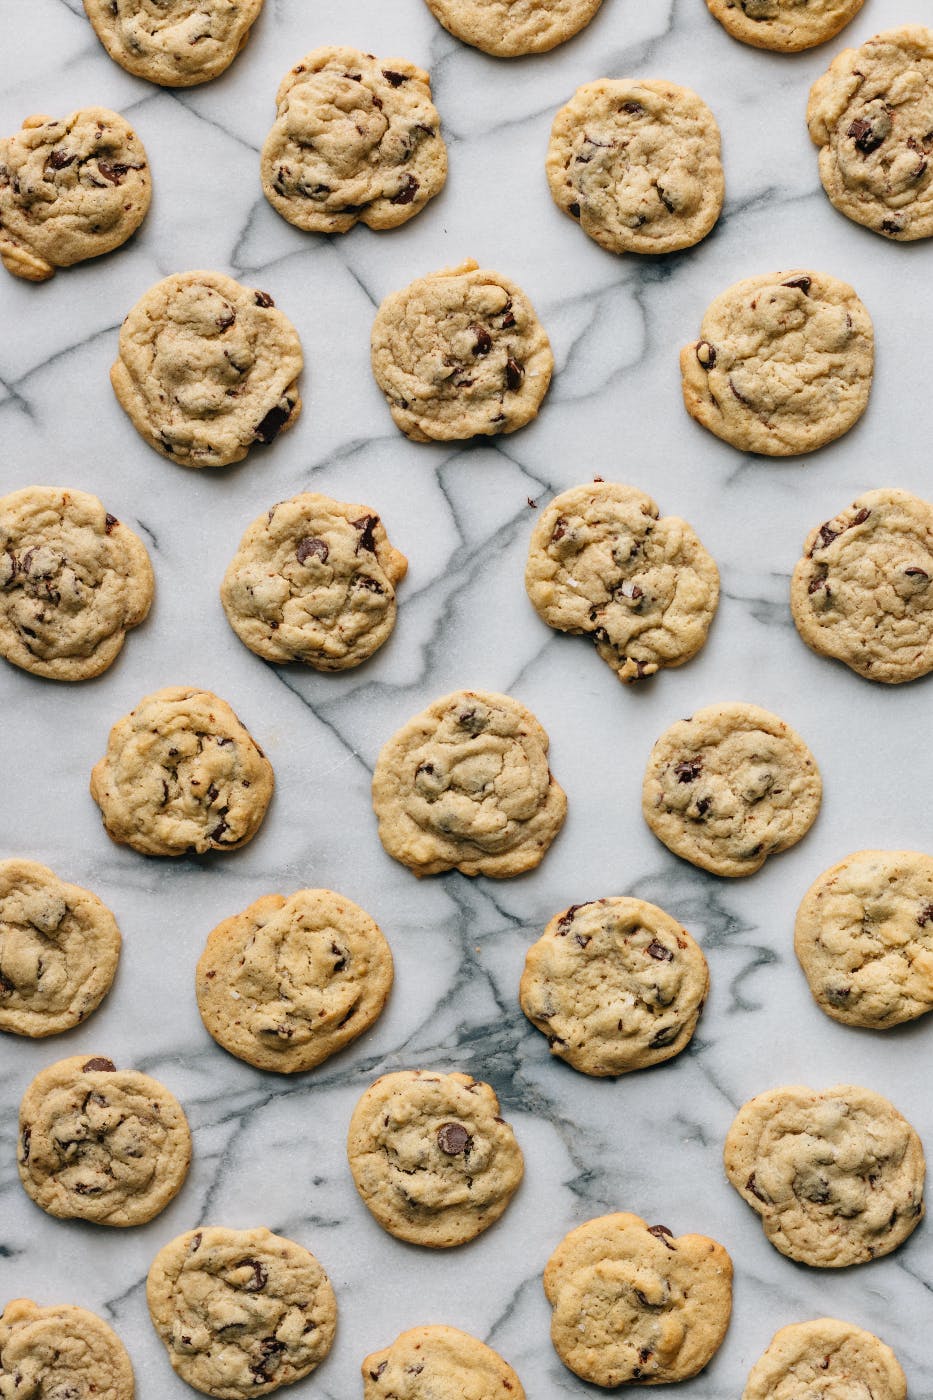 Chocolate chip cookies on a marble countertop